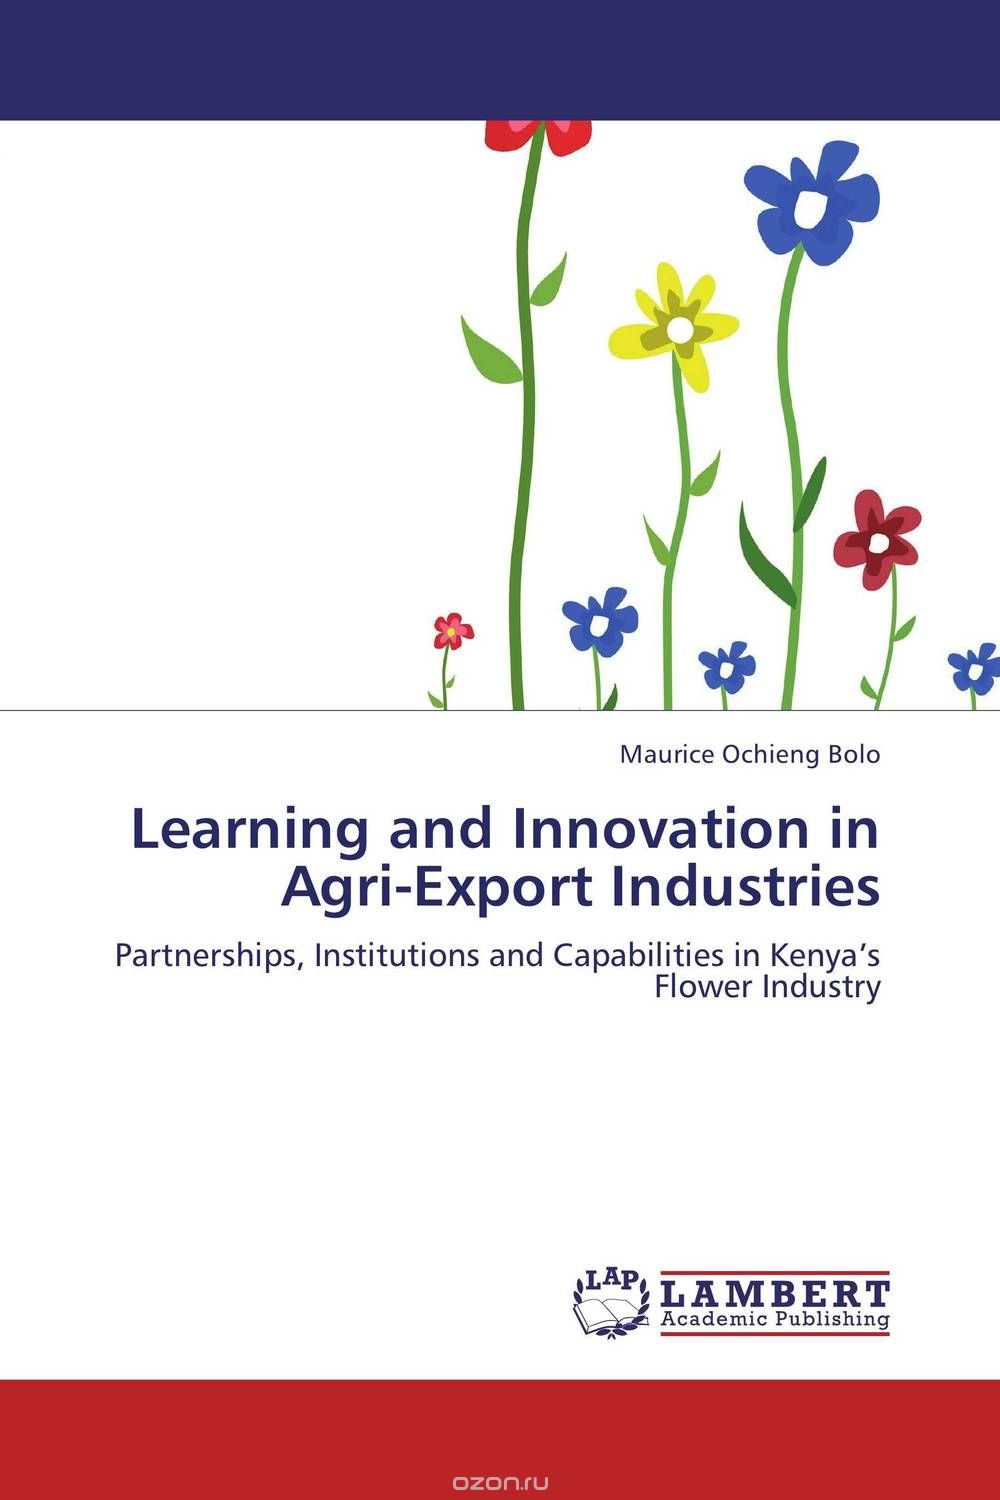 Learning and Innovation in Agri-Export Industries